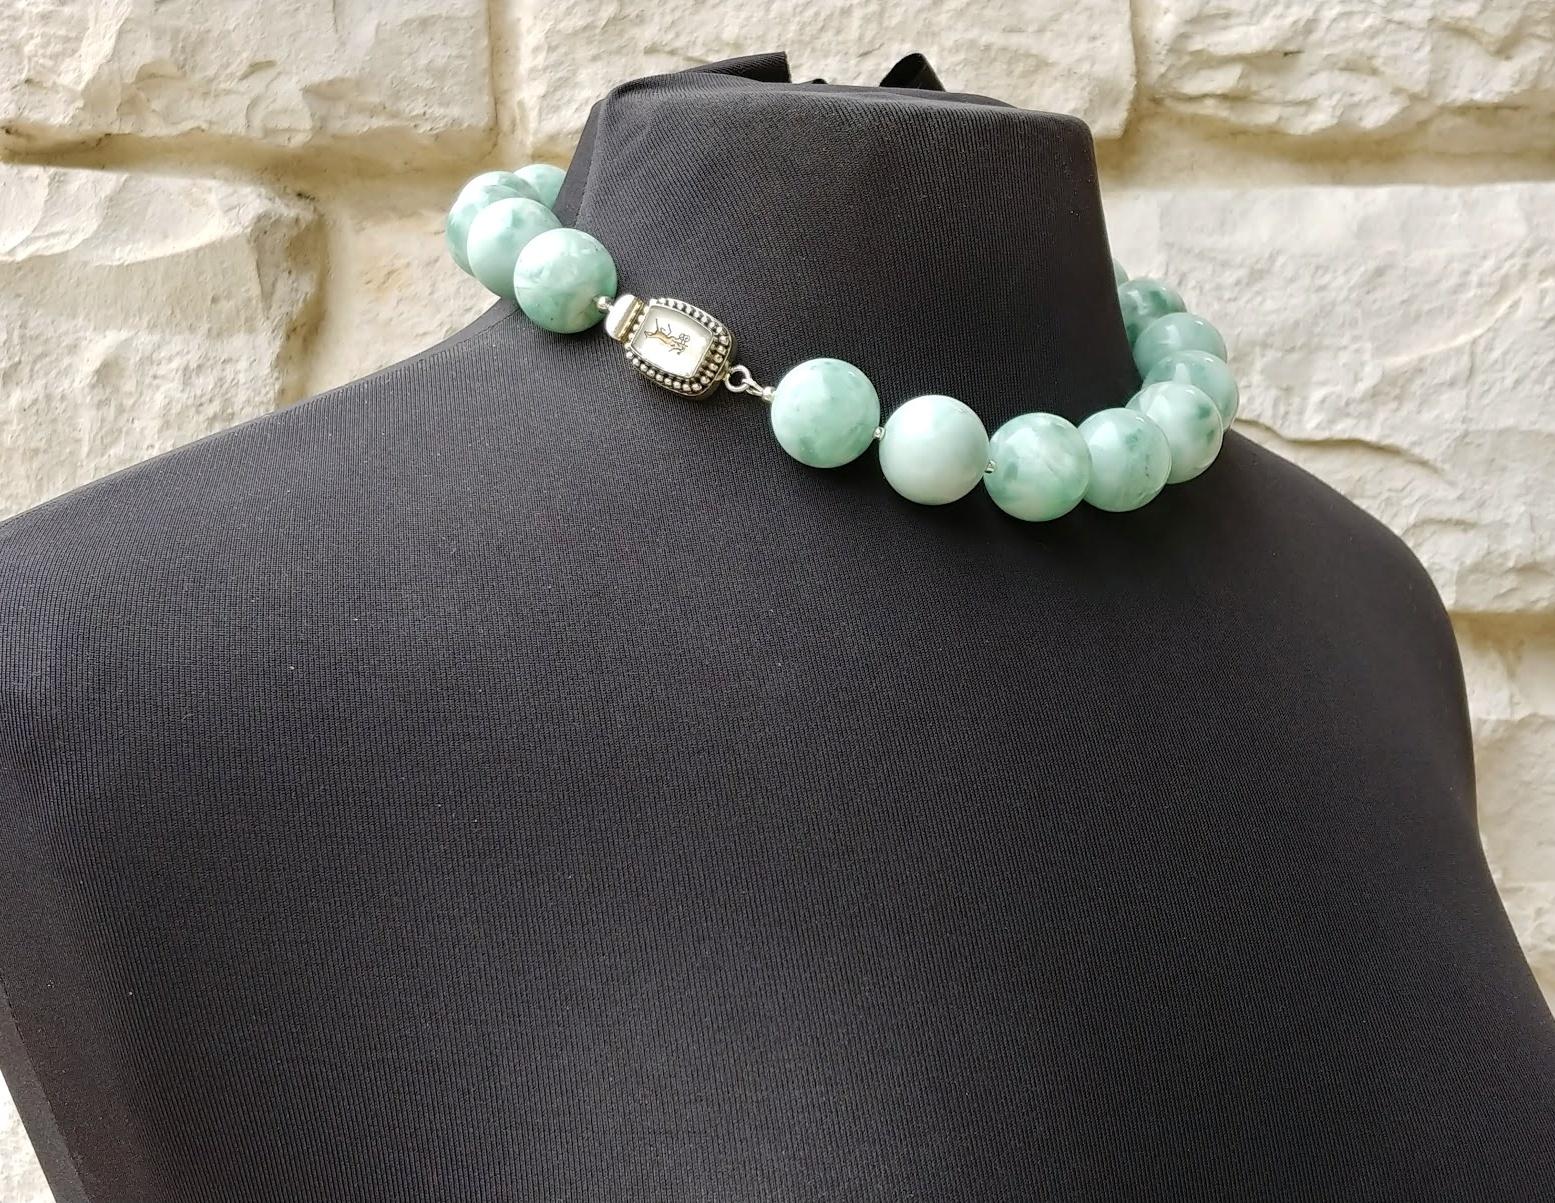 Women's Chatoyant Green Angelite Necklace With Unique Vintage Clasp For Sale